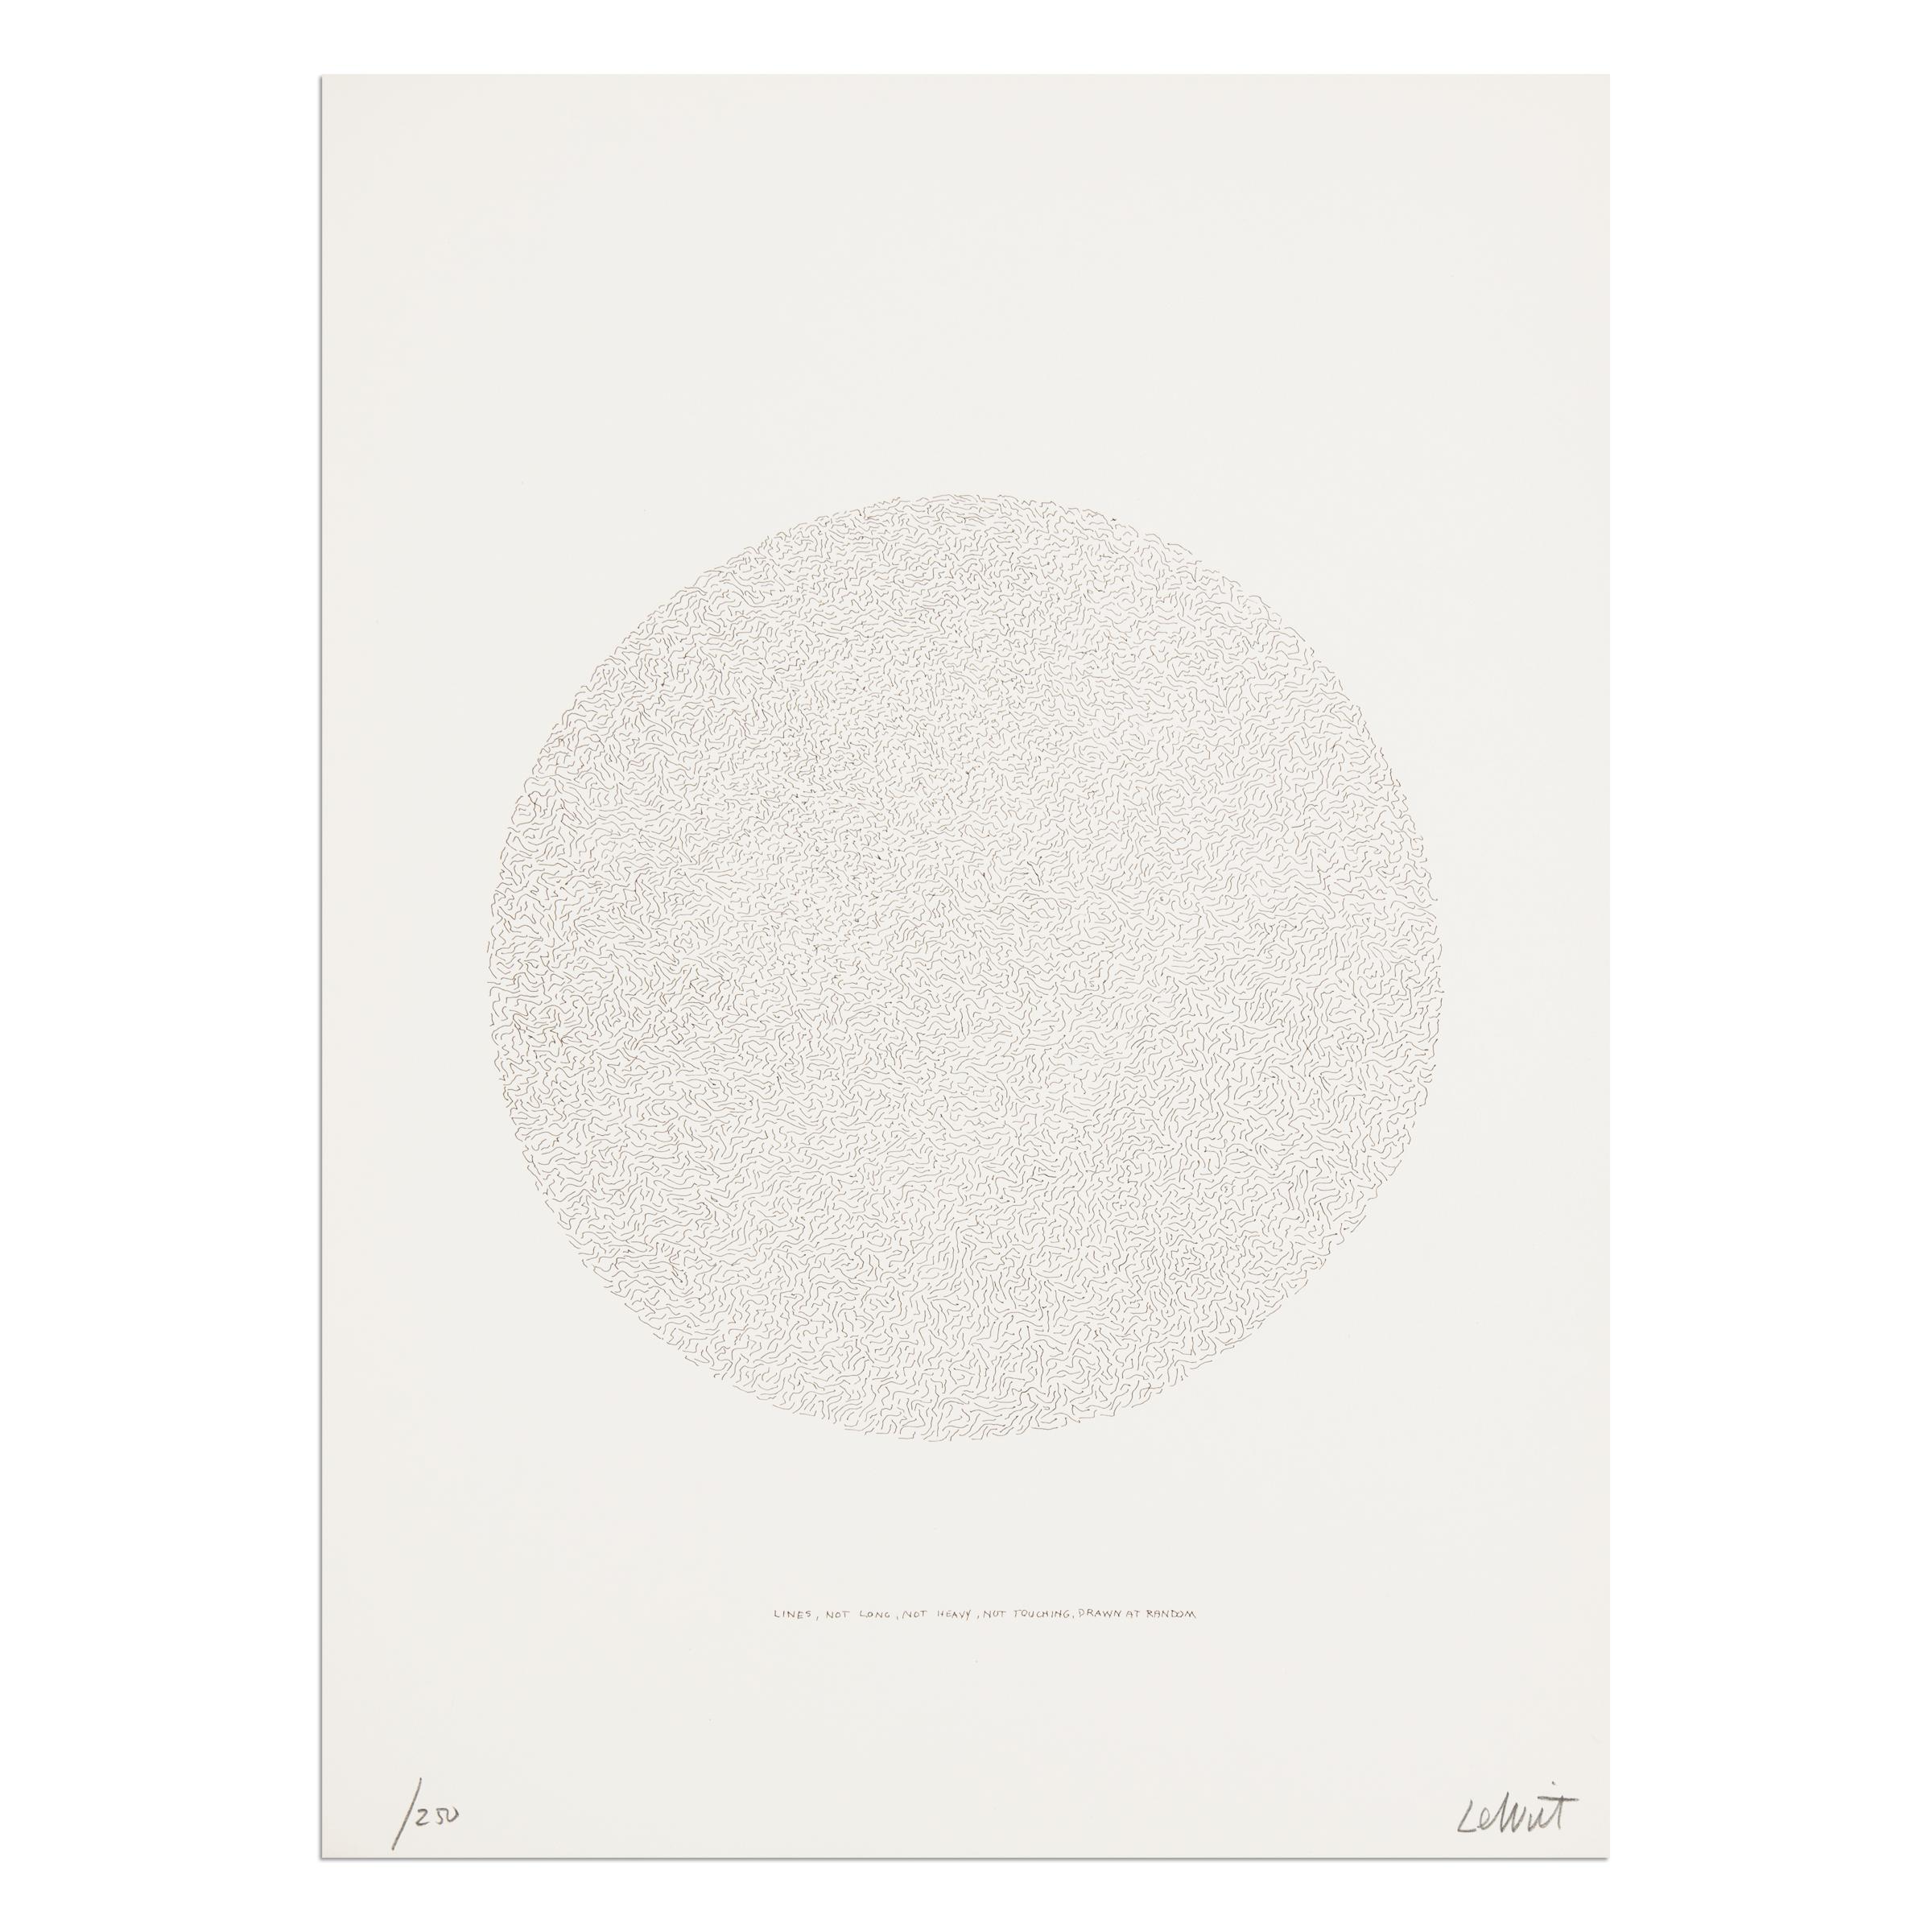 Sol LeWitt (American, 1928-2007)
Lines, Not Long, Not Heavy, Not Touching, Drawn at Random (Circle), 1970
Medium: Lithograph on wove paper
Dimensions: 44.5 × 32.1 cm (17.5 × 12.6 in)
Edition of 250: Hand-signed and numbered in pencil
Publishers: